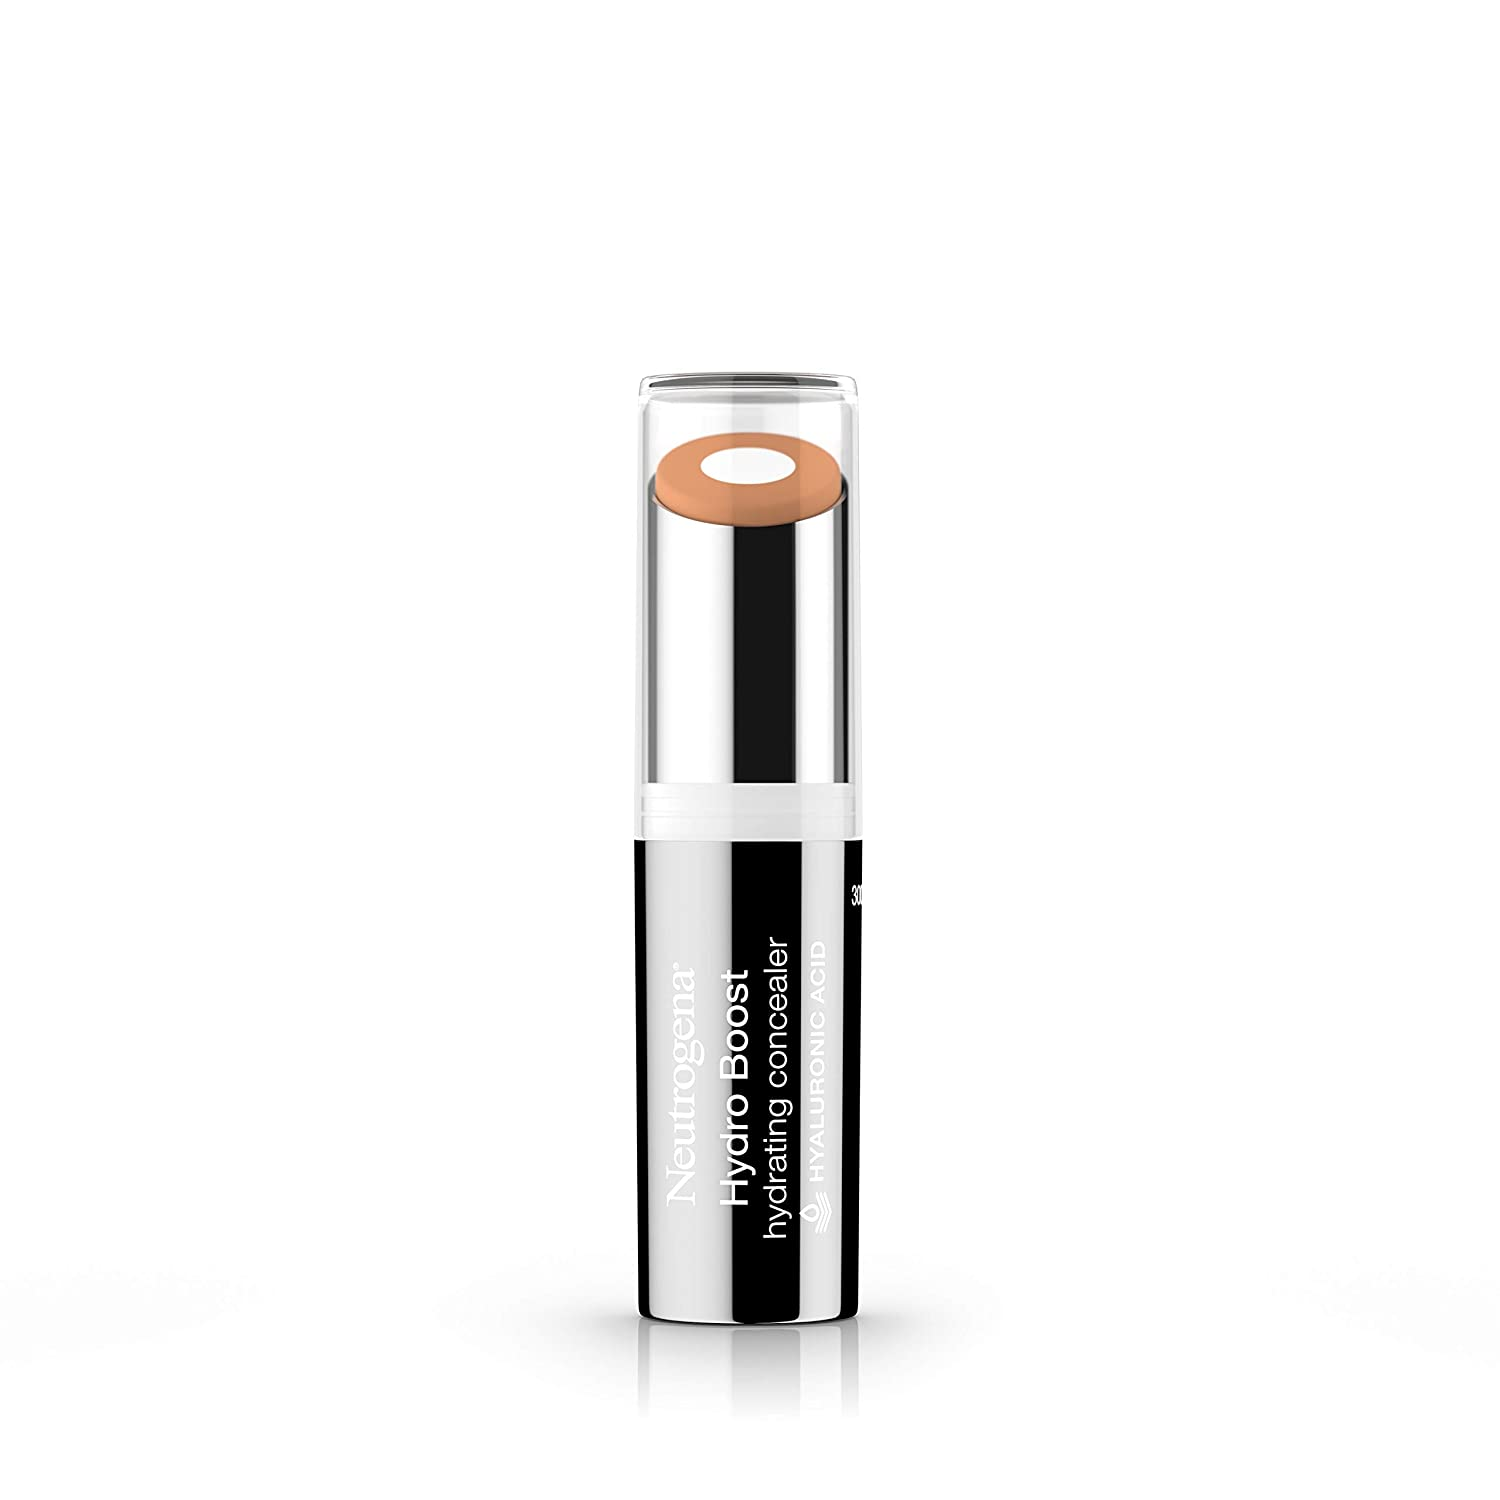 Neutrogena Hydro Boost Hydrating Concealer Stick for Dry Skin  cover-up makeup helps mask facial imperfections such as redness and dark under eye circles and offers smooth coverage that blends effortlessly for a fresh look all day